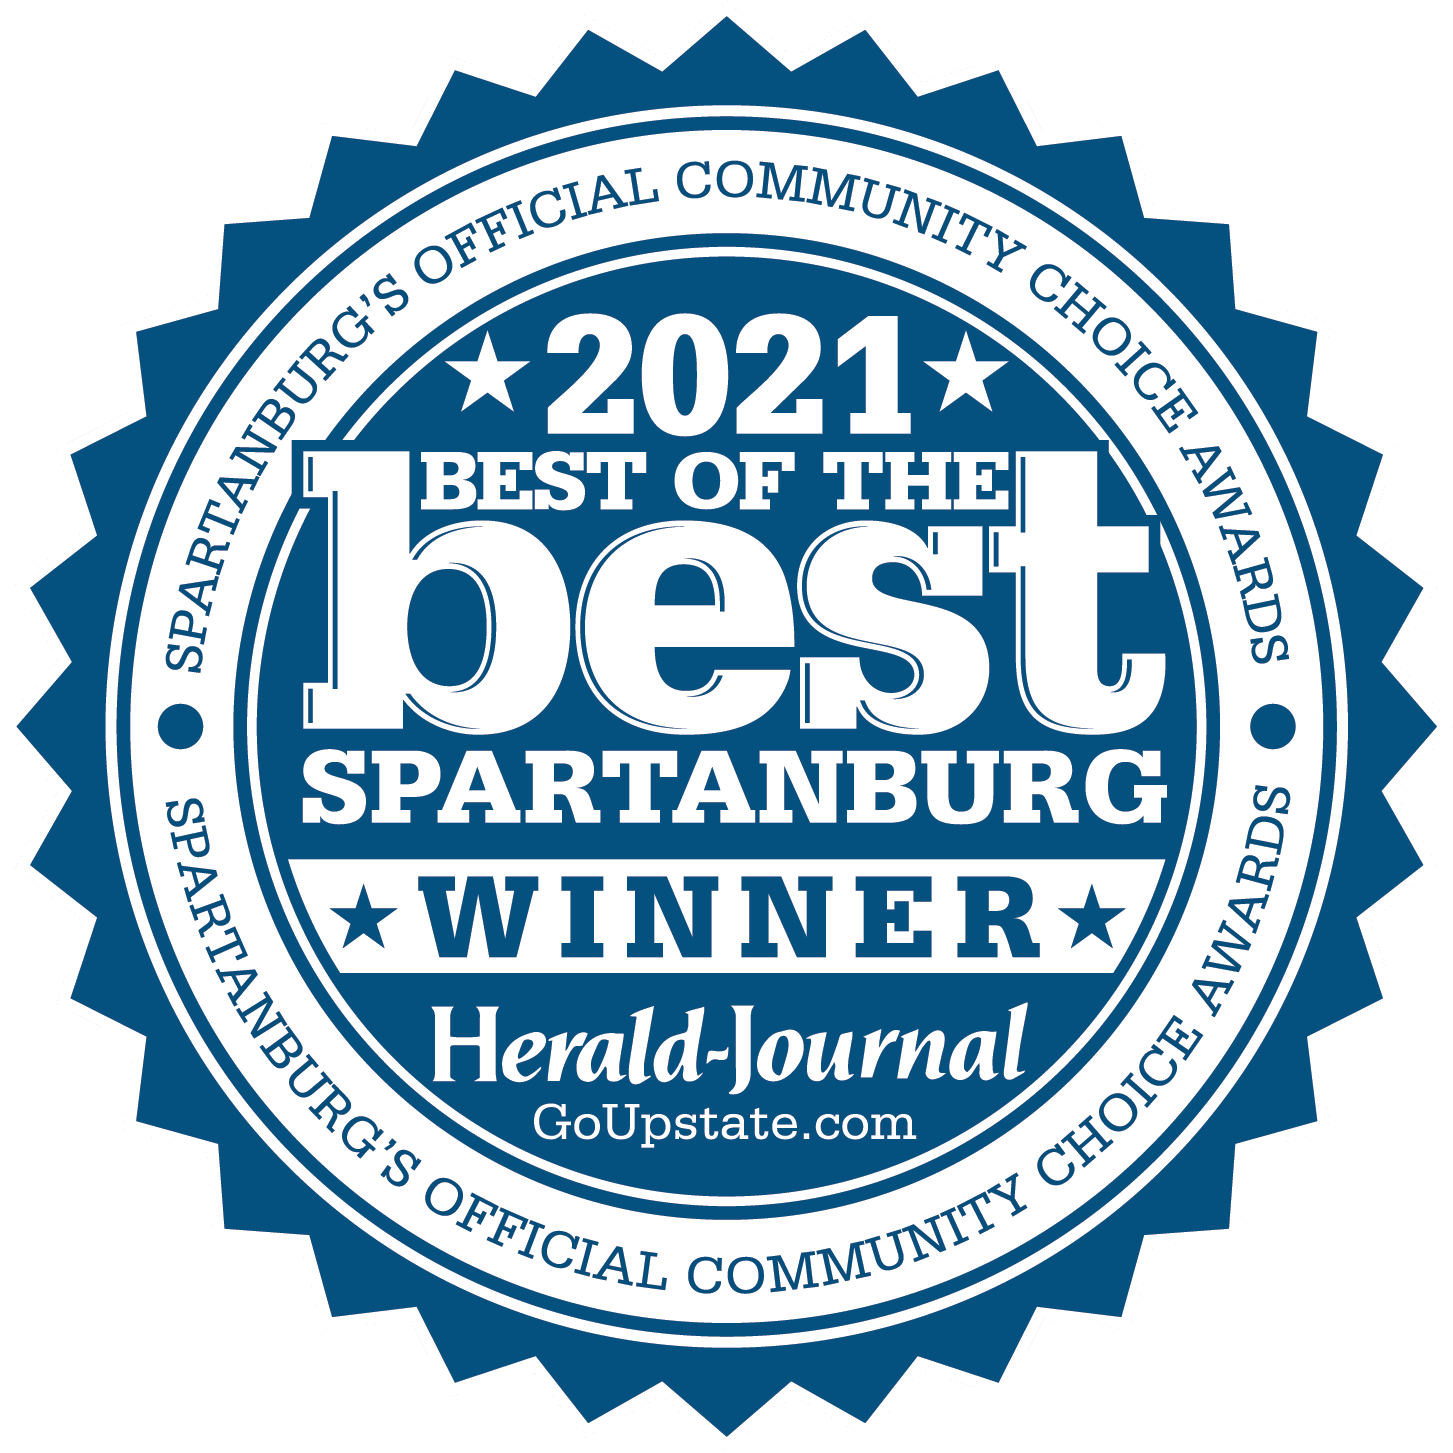 2021 Best of the best spartanburg's official peoples choice award by herald journal